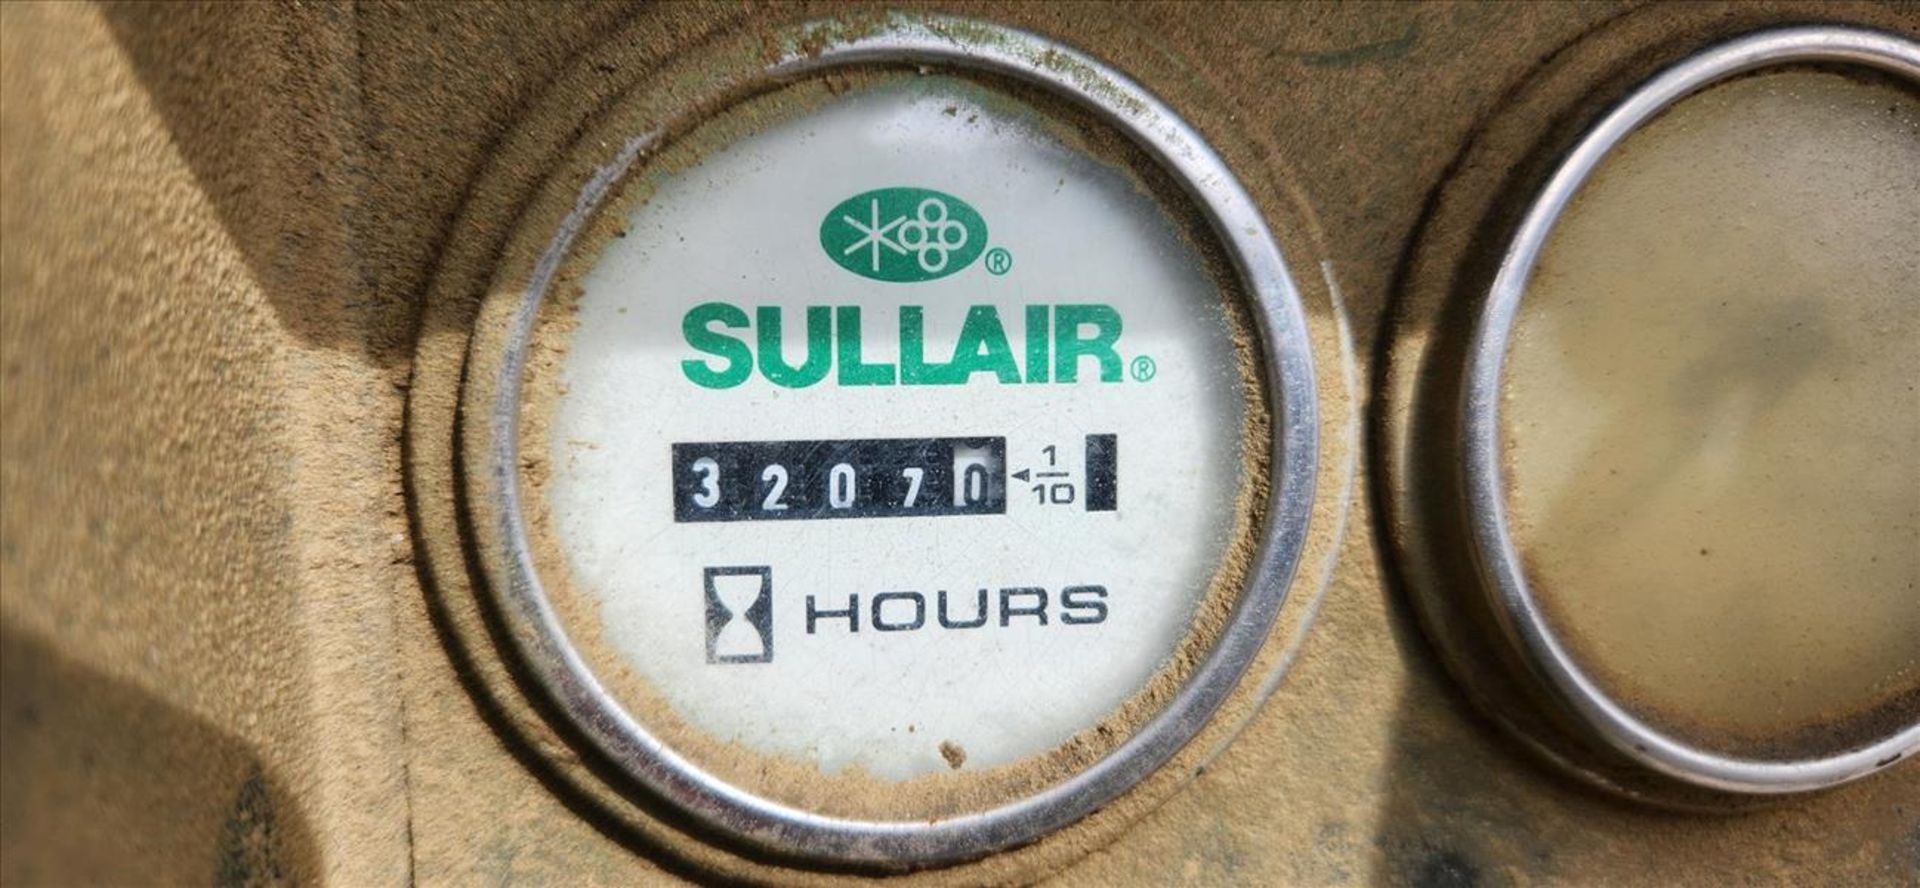 Sullair air compressor, mod. 185 DPQJD, ser. no. 004-134214, towable, JohnDeere diesel eng., approx. - Image 3 of 6